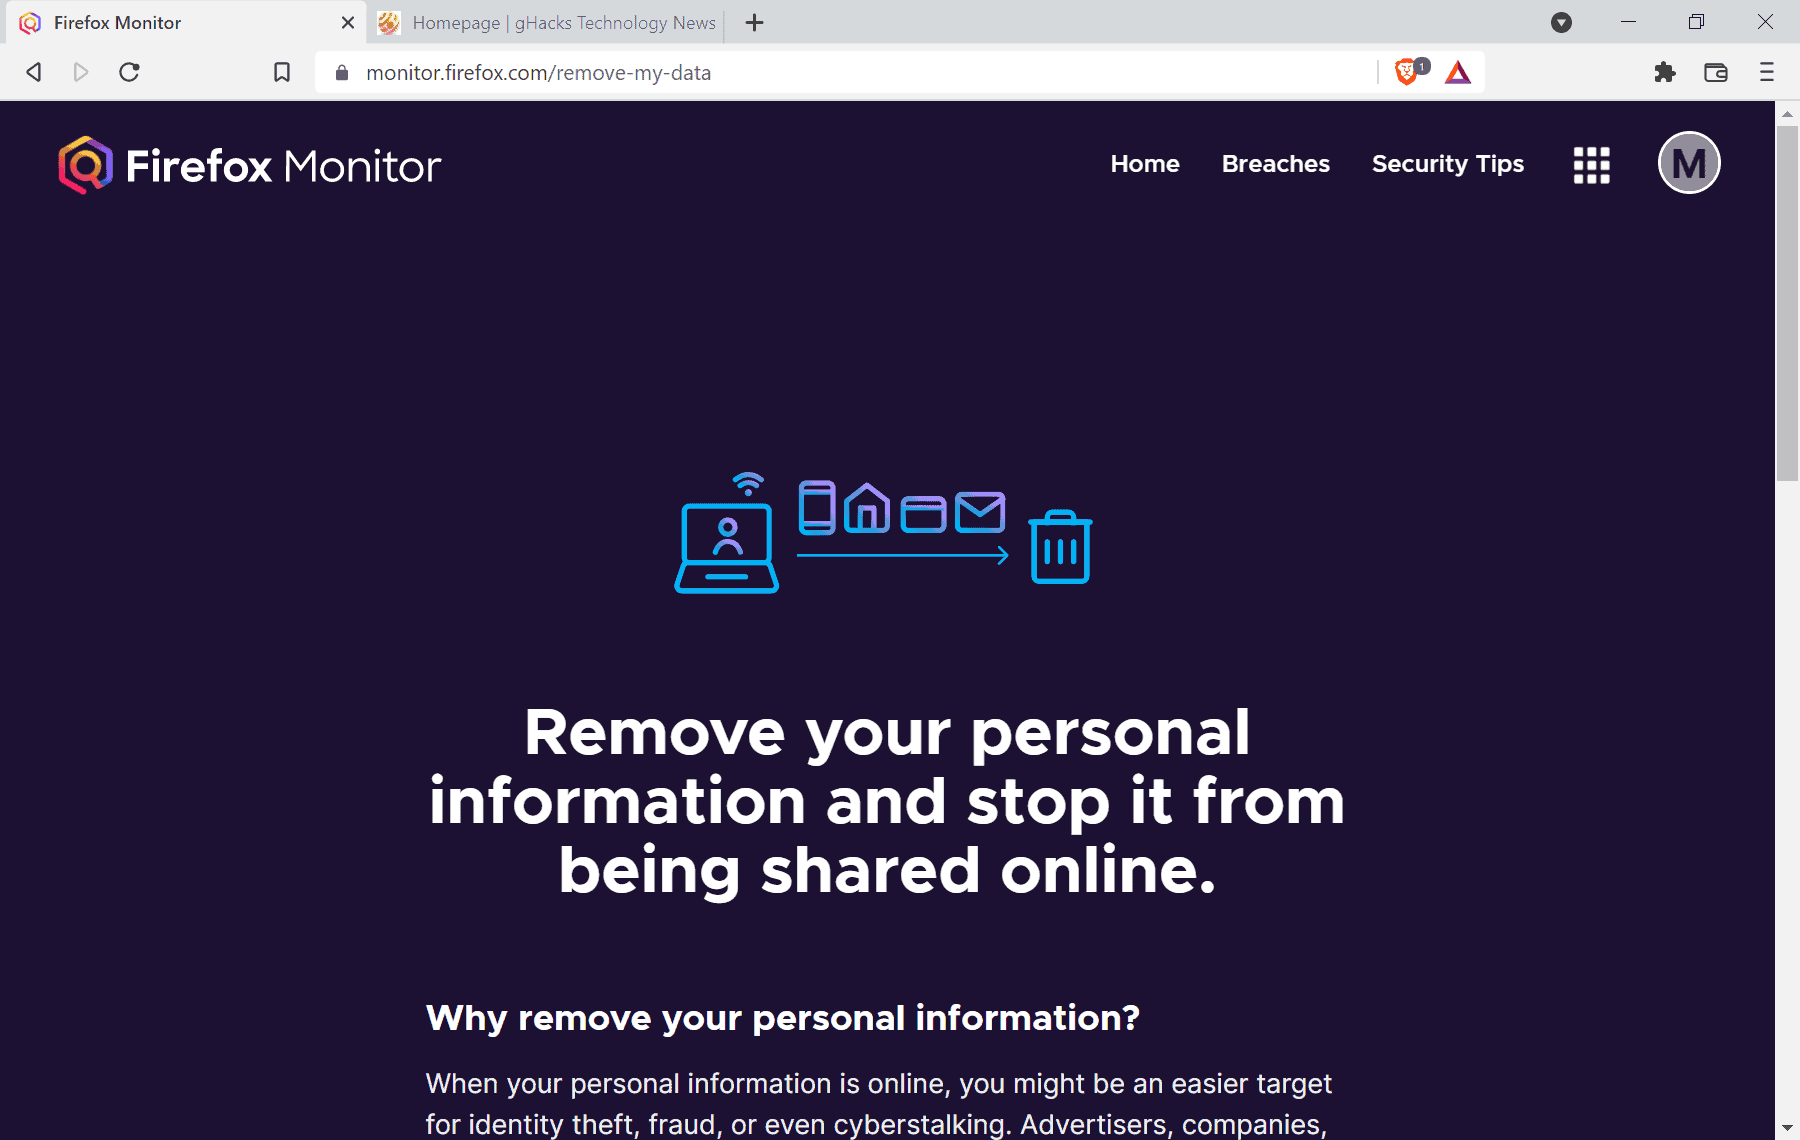 Firefox Monitor is planning to remove personal information from the Internet
  